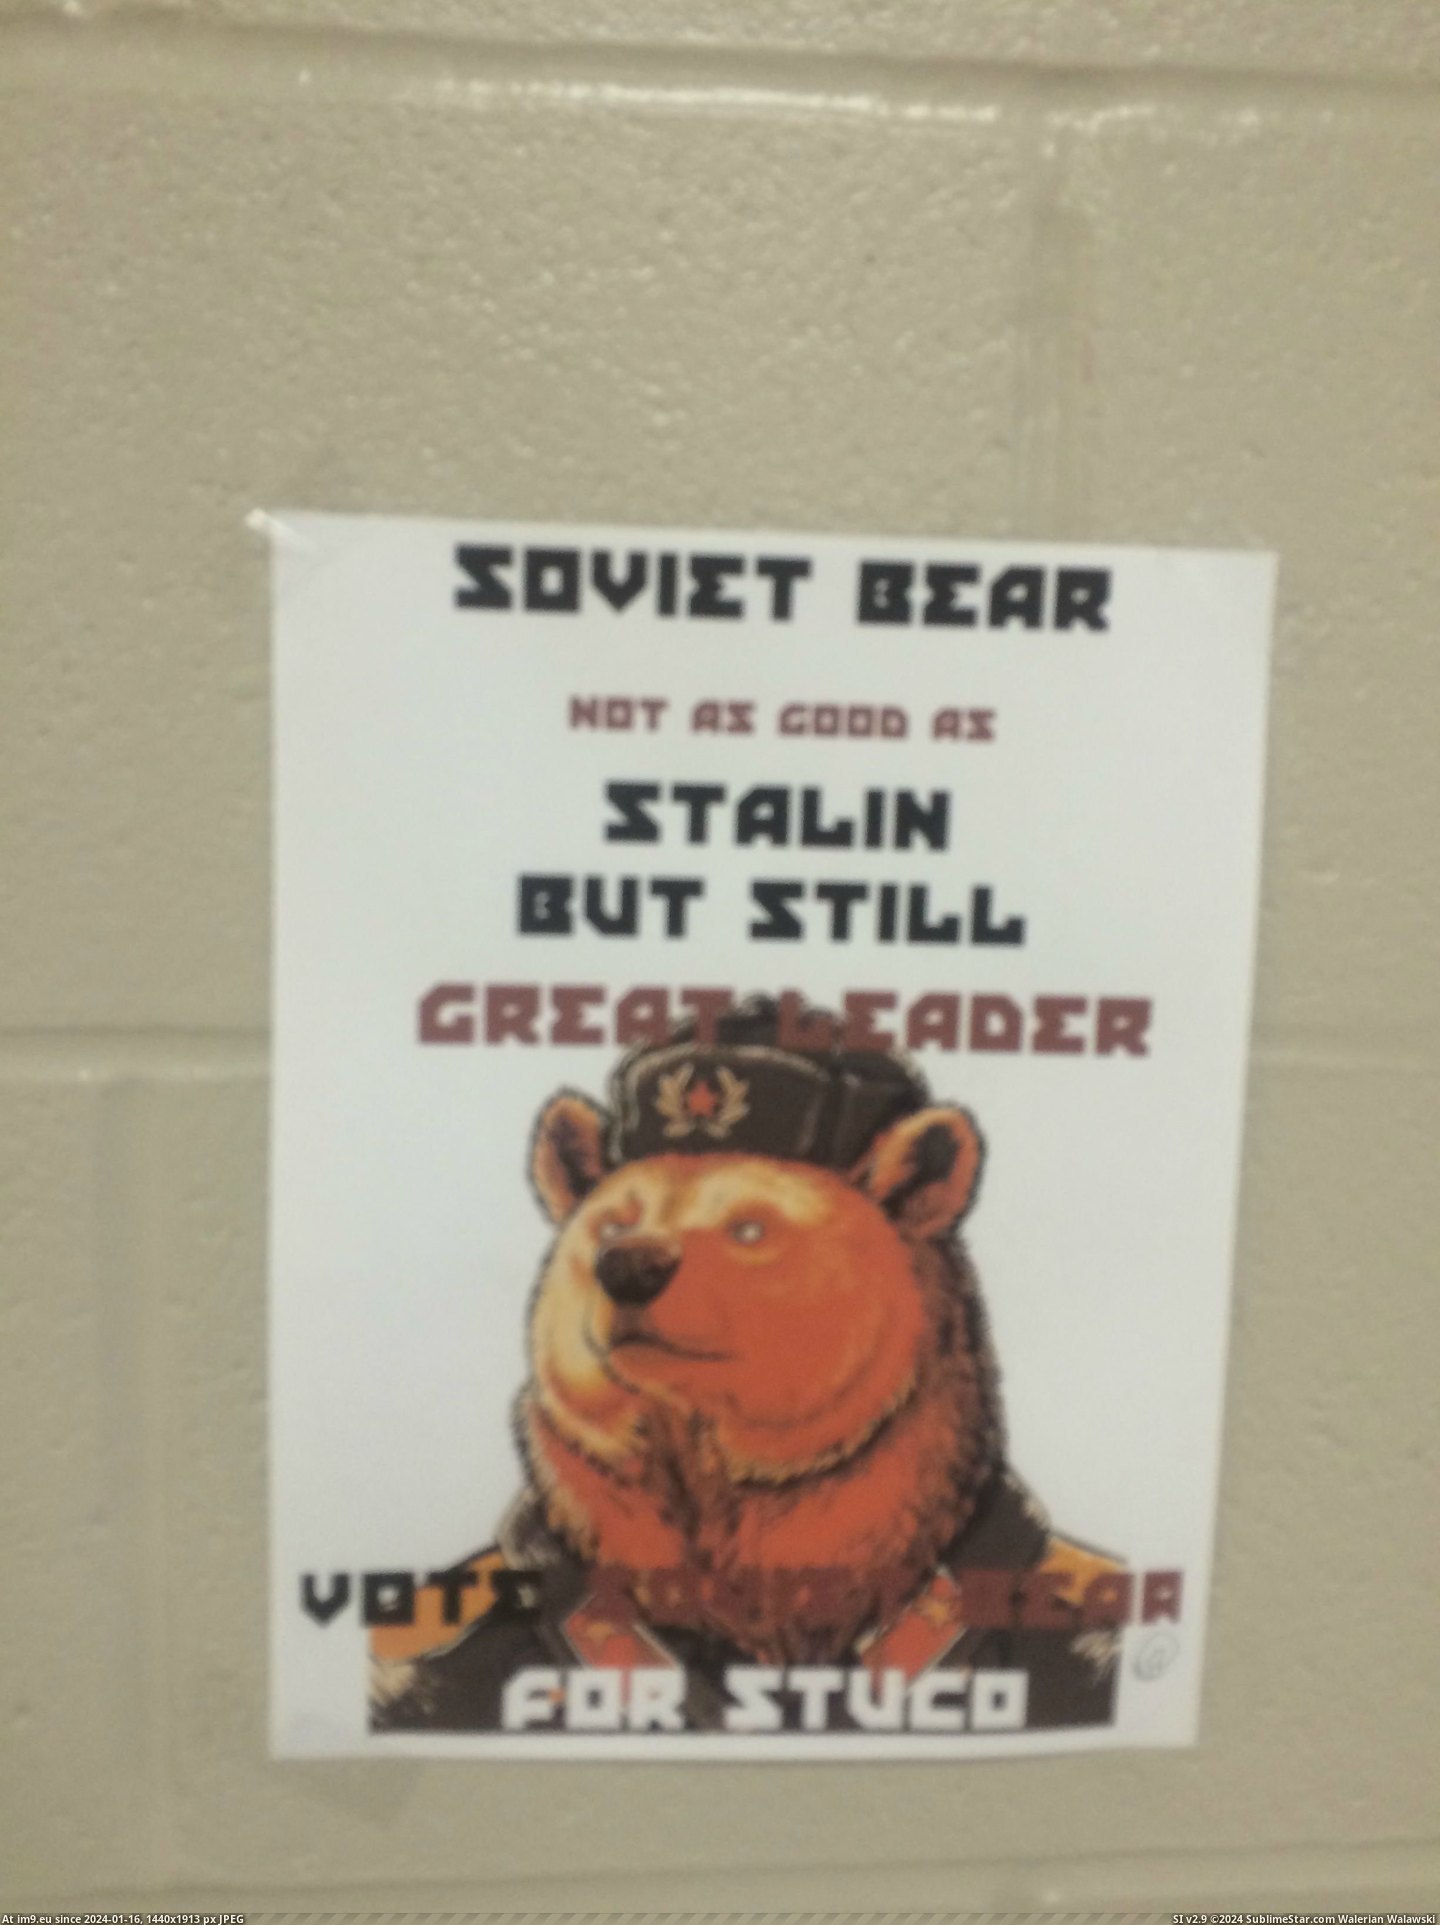 #Funny #School #Decided #Holding #Soviet #Council #Elections #Bear #Student #Run [Funny] So my school is holding elections for student council... and someone has decided to run as Soviet Bear 13 Pic. (Bild von album My r/FUNNY favs))